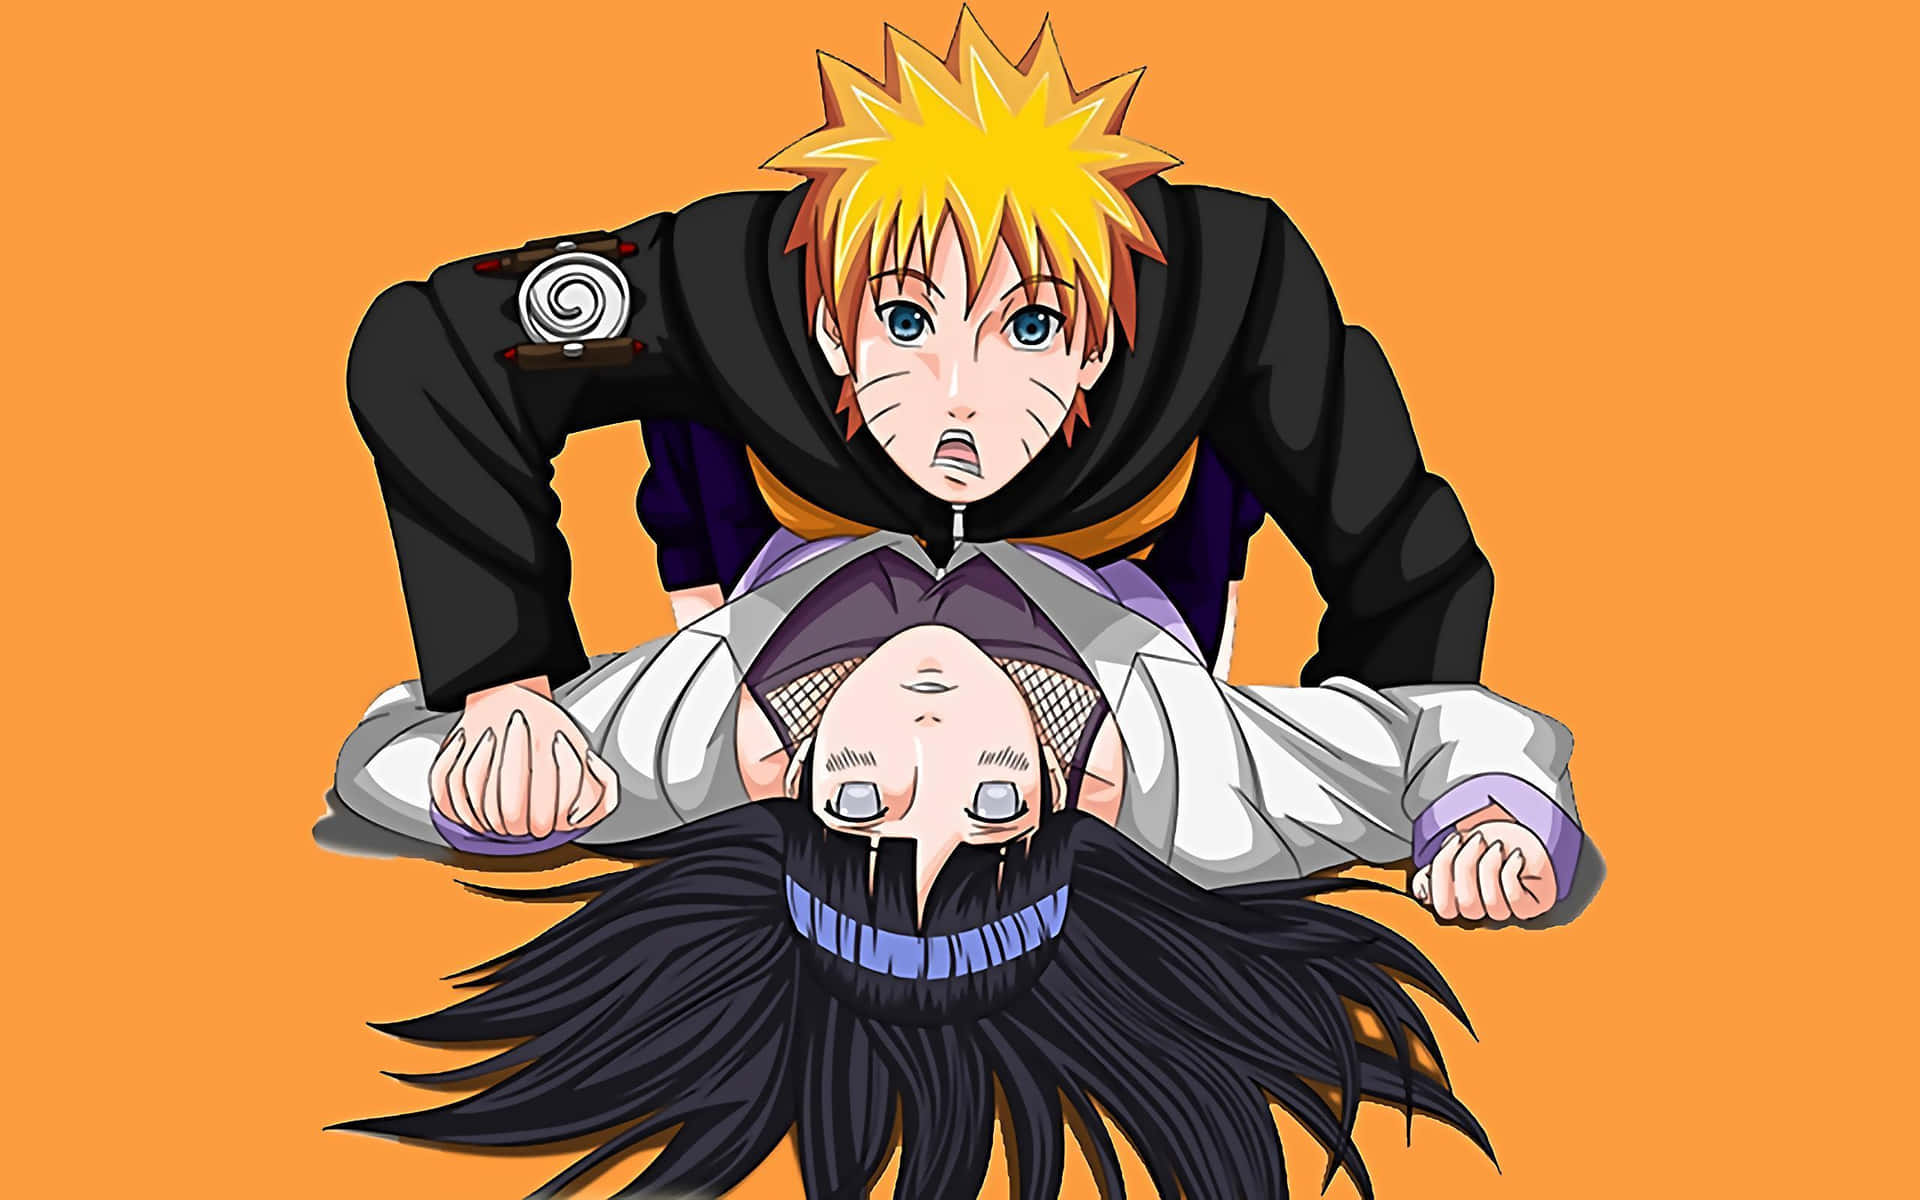 From Shy Girl to Fearless Protector: How Naruto's Hinata Uzumaki Won Our Hearts